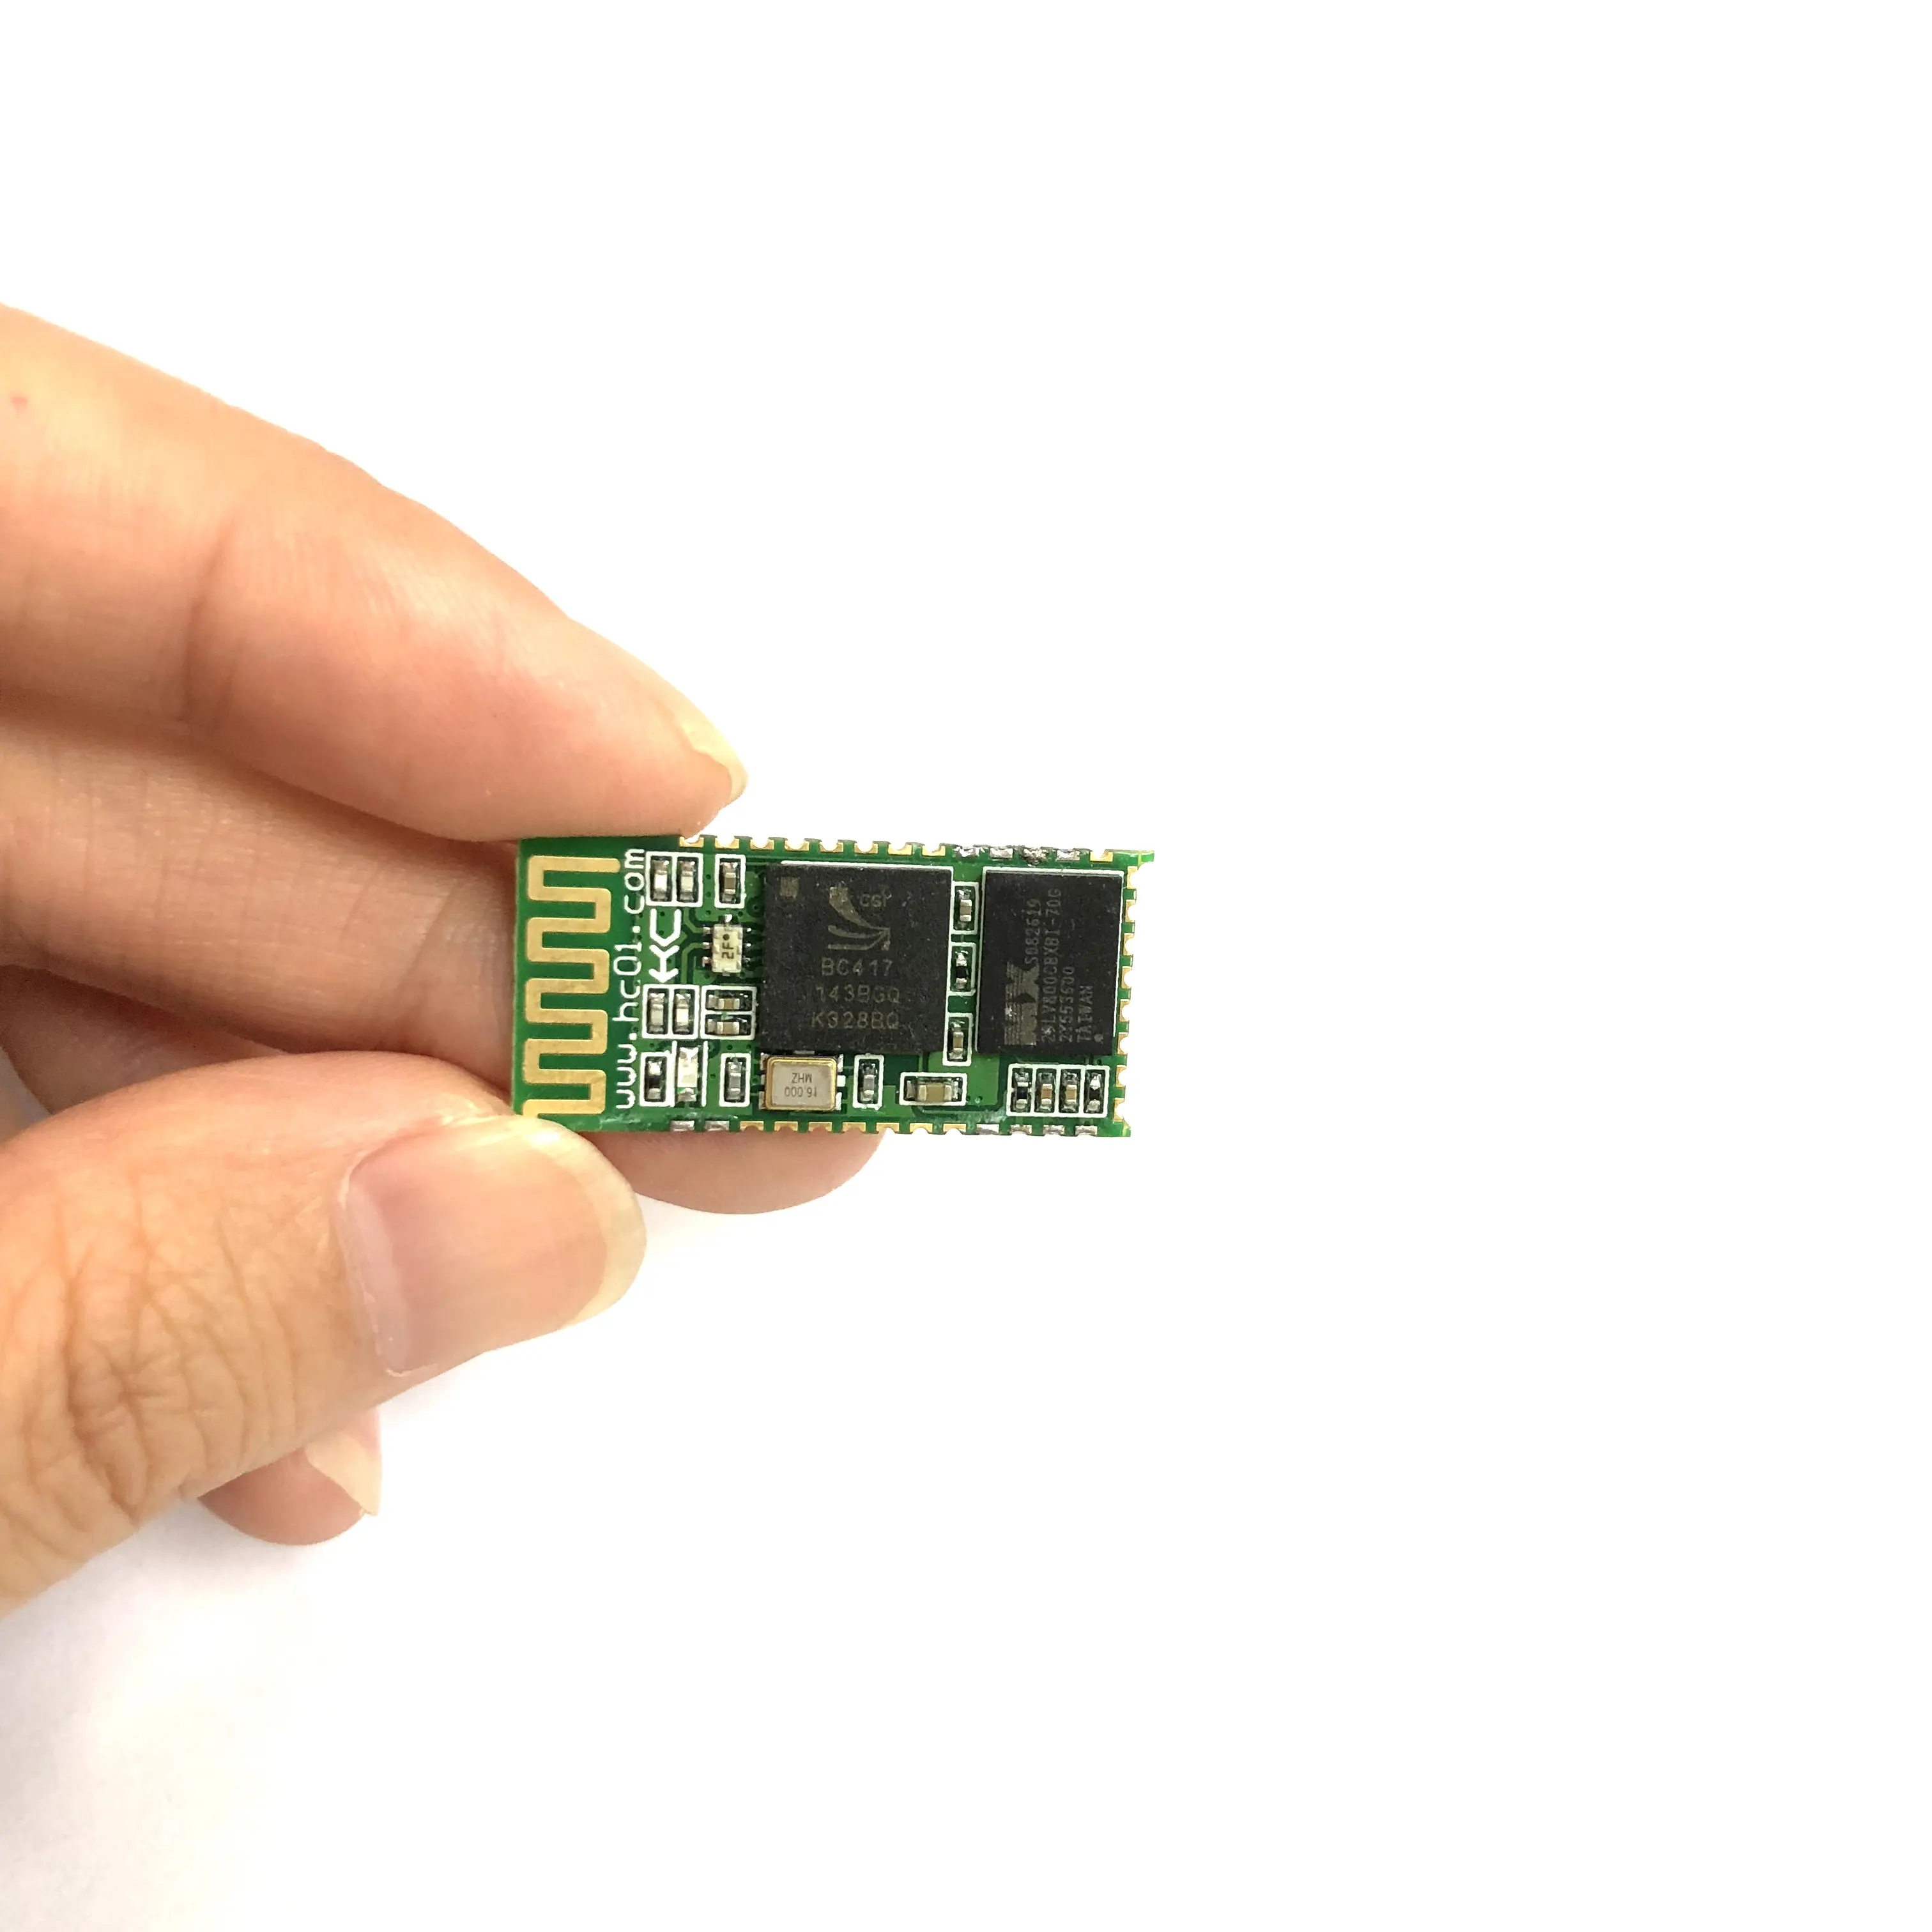 SMD HC-06 HC 06 master and slave wireless communication serial BT module with original CSR chip